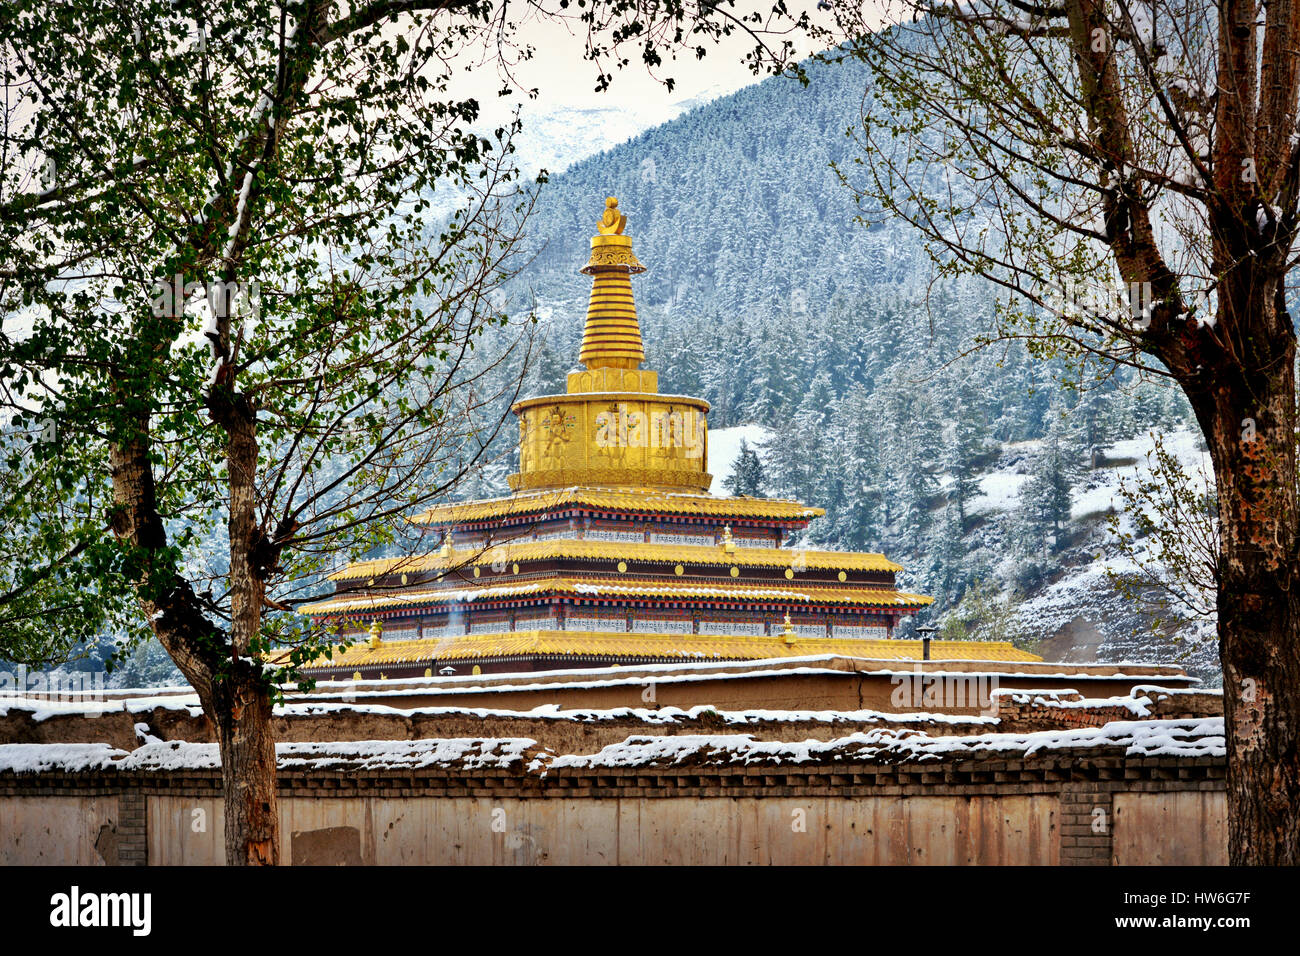 The Golden Pagoda in Labrang Monastery of Xiahe, Gansu Province, China Stock Photo